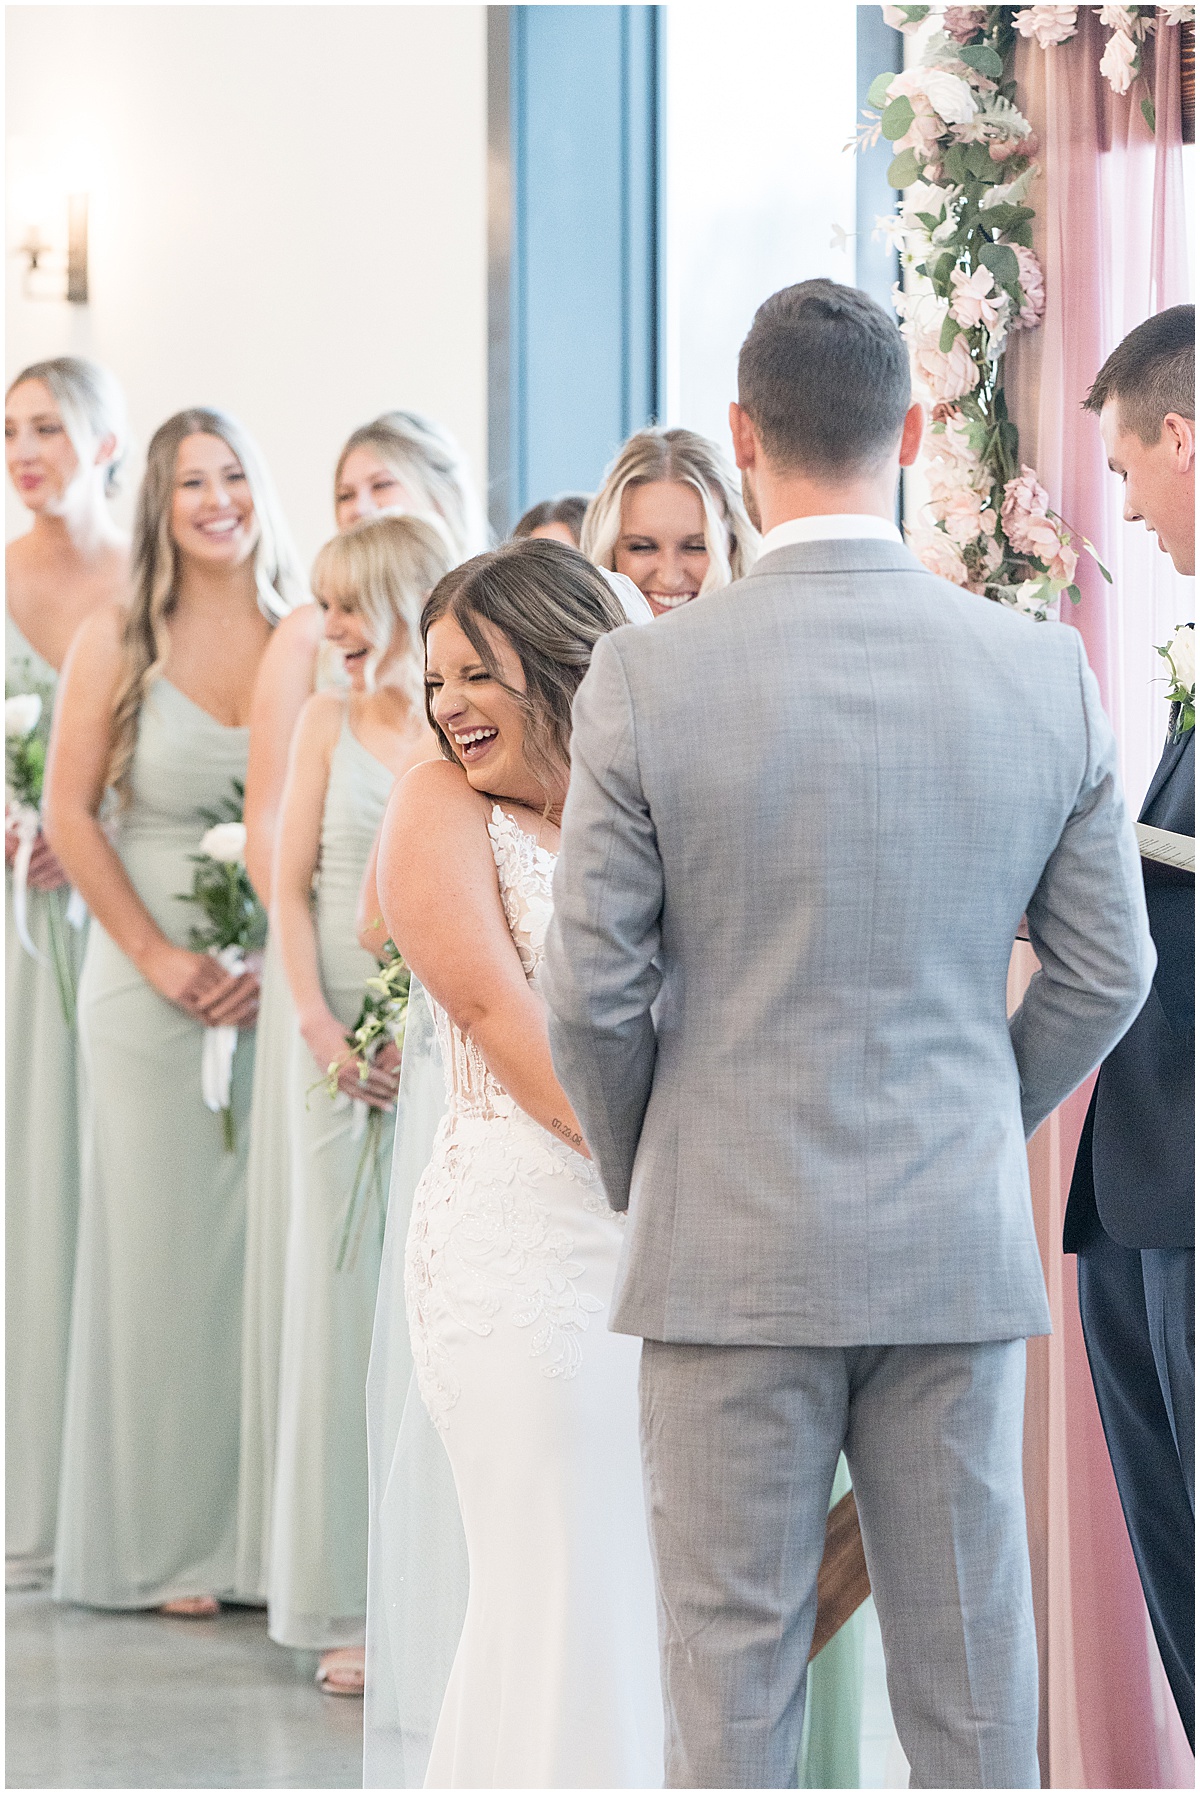 Bride laughing during ceremony at wedding at New Journey Farms